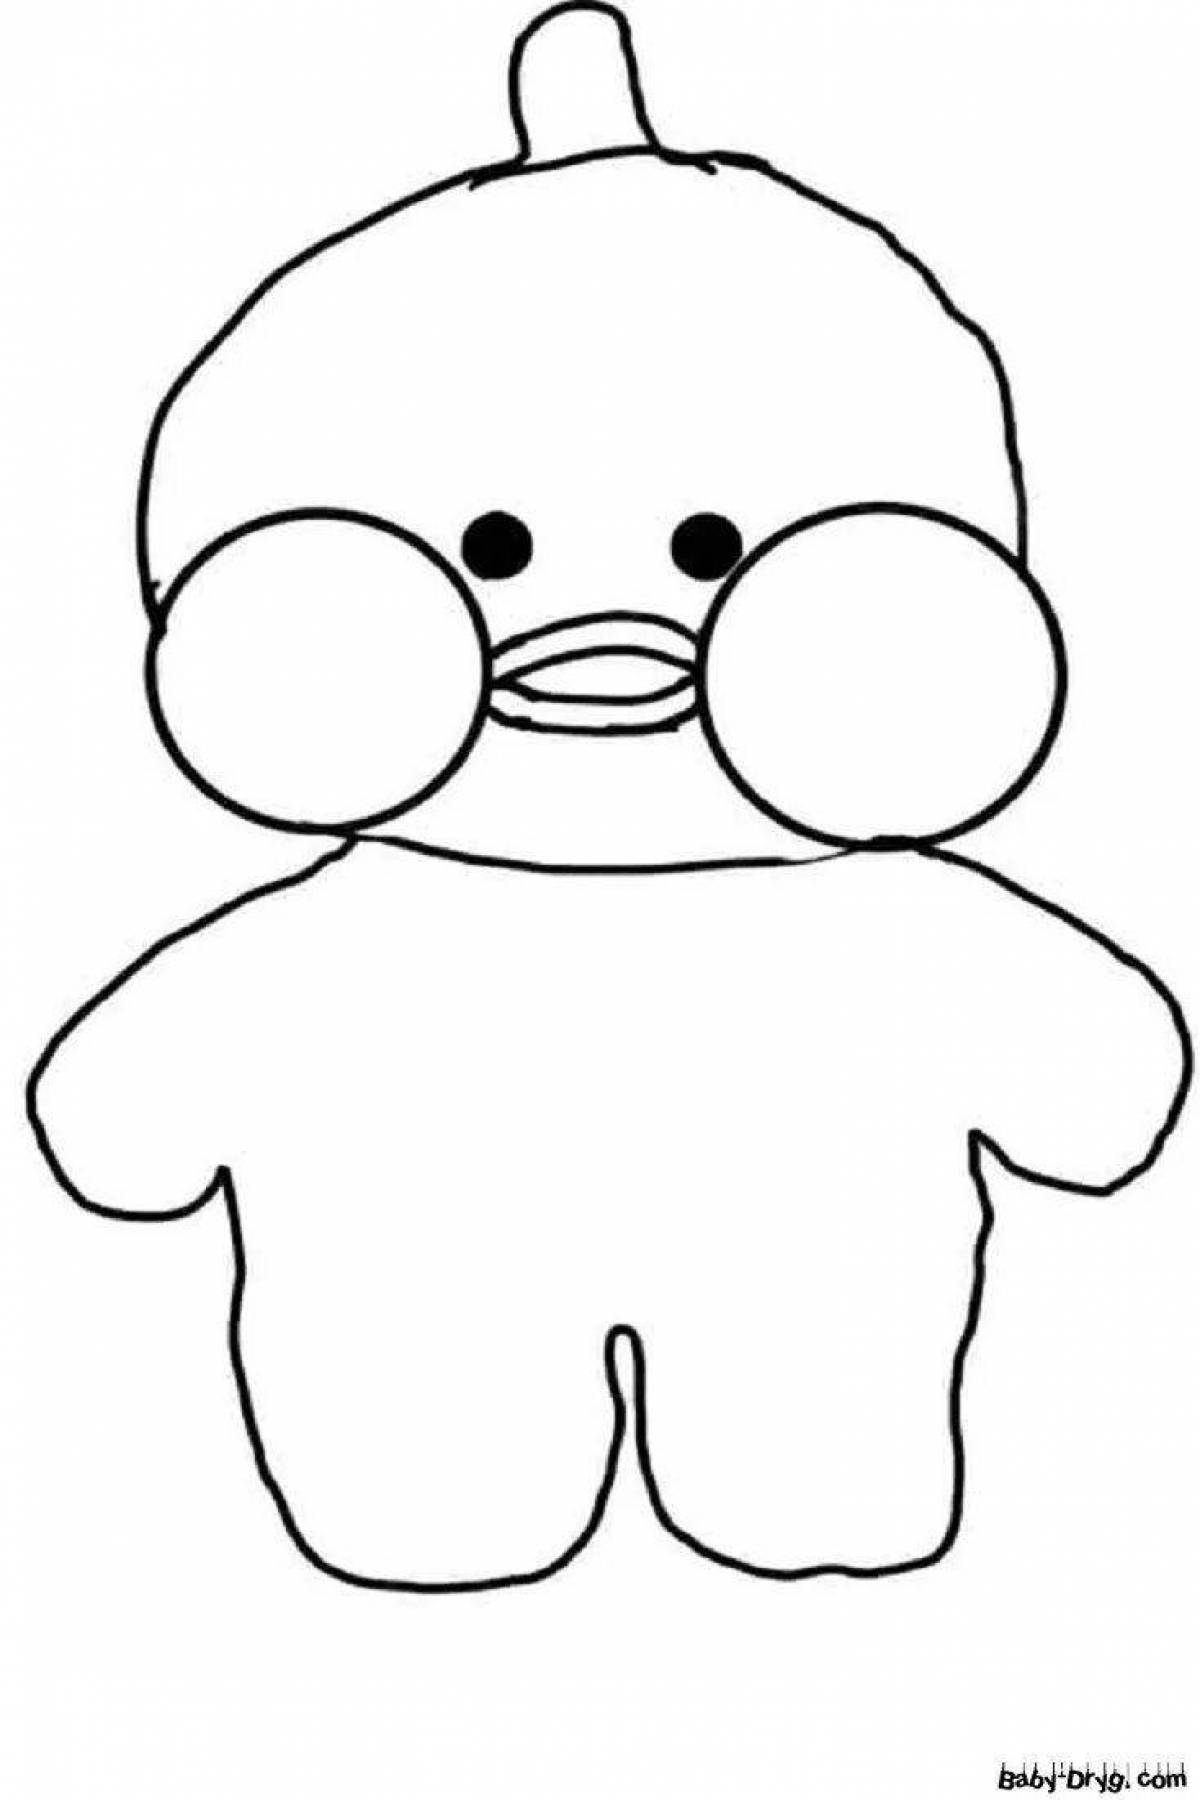 Lalafanfan adorable mini duck coloring page